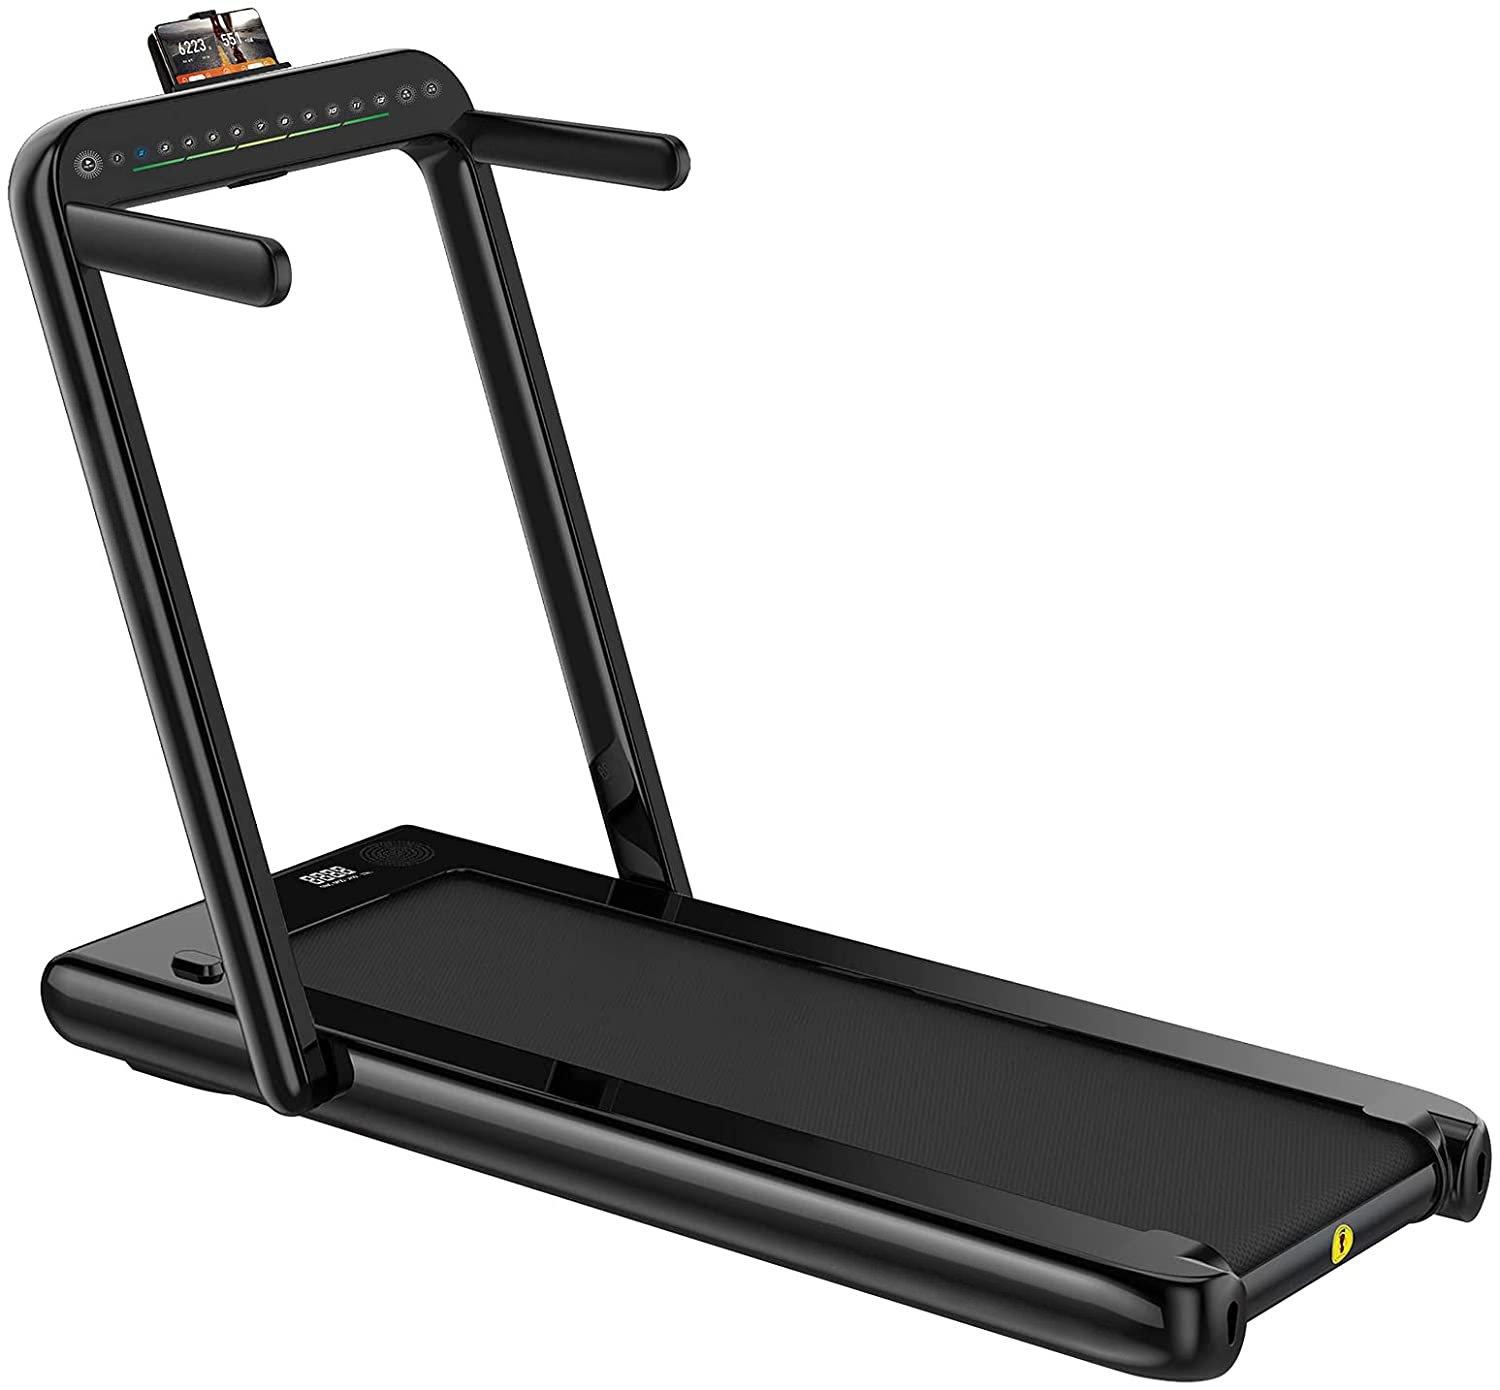 Built-in Bluetooth Speaker 2-In-1 Foldable Treadmill for Home&Office